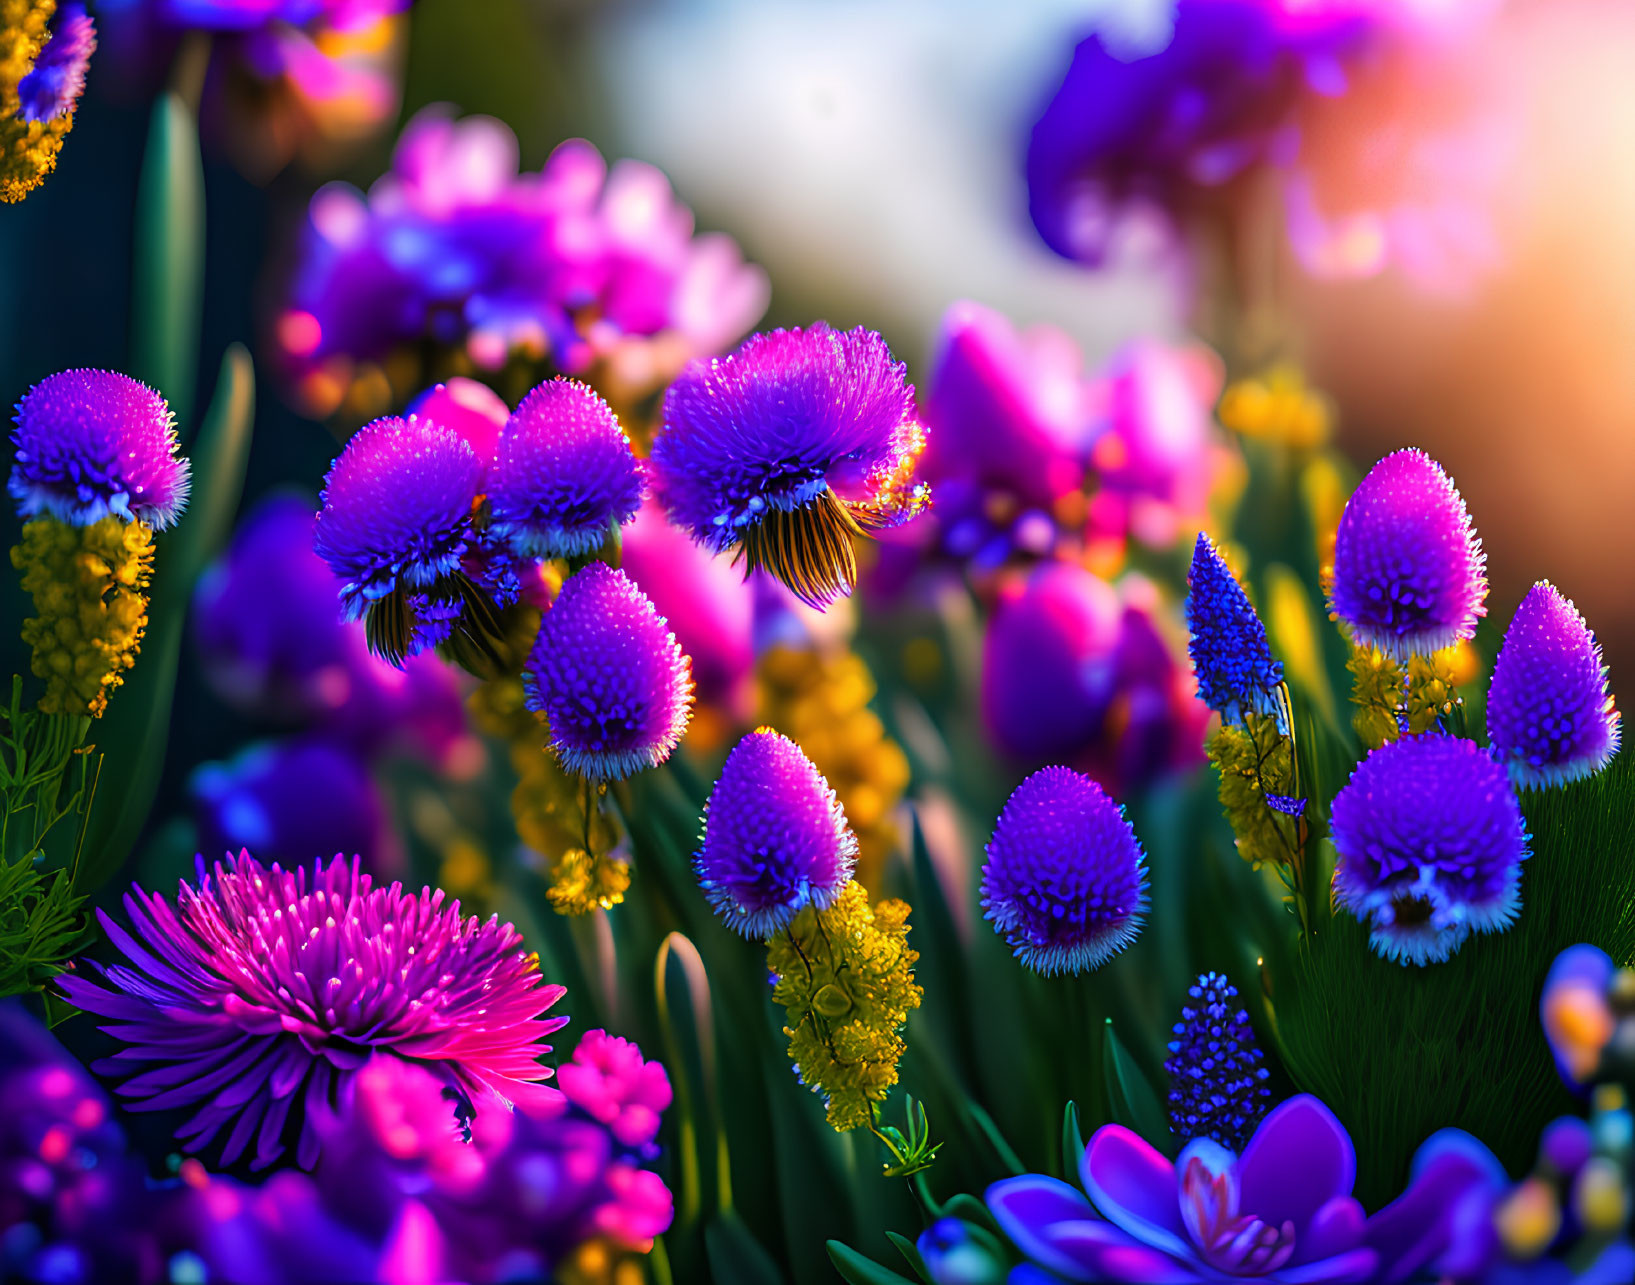 Colorful Garden with Purple, Pink, and Yellow Flowers in Golden Sunlight